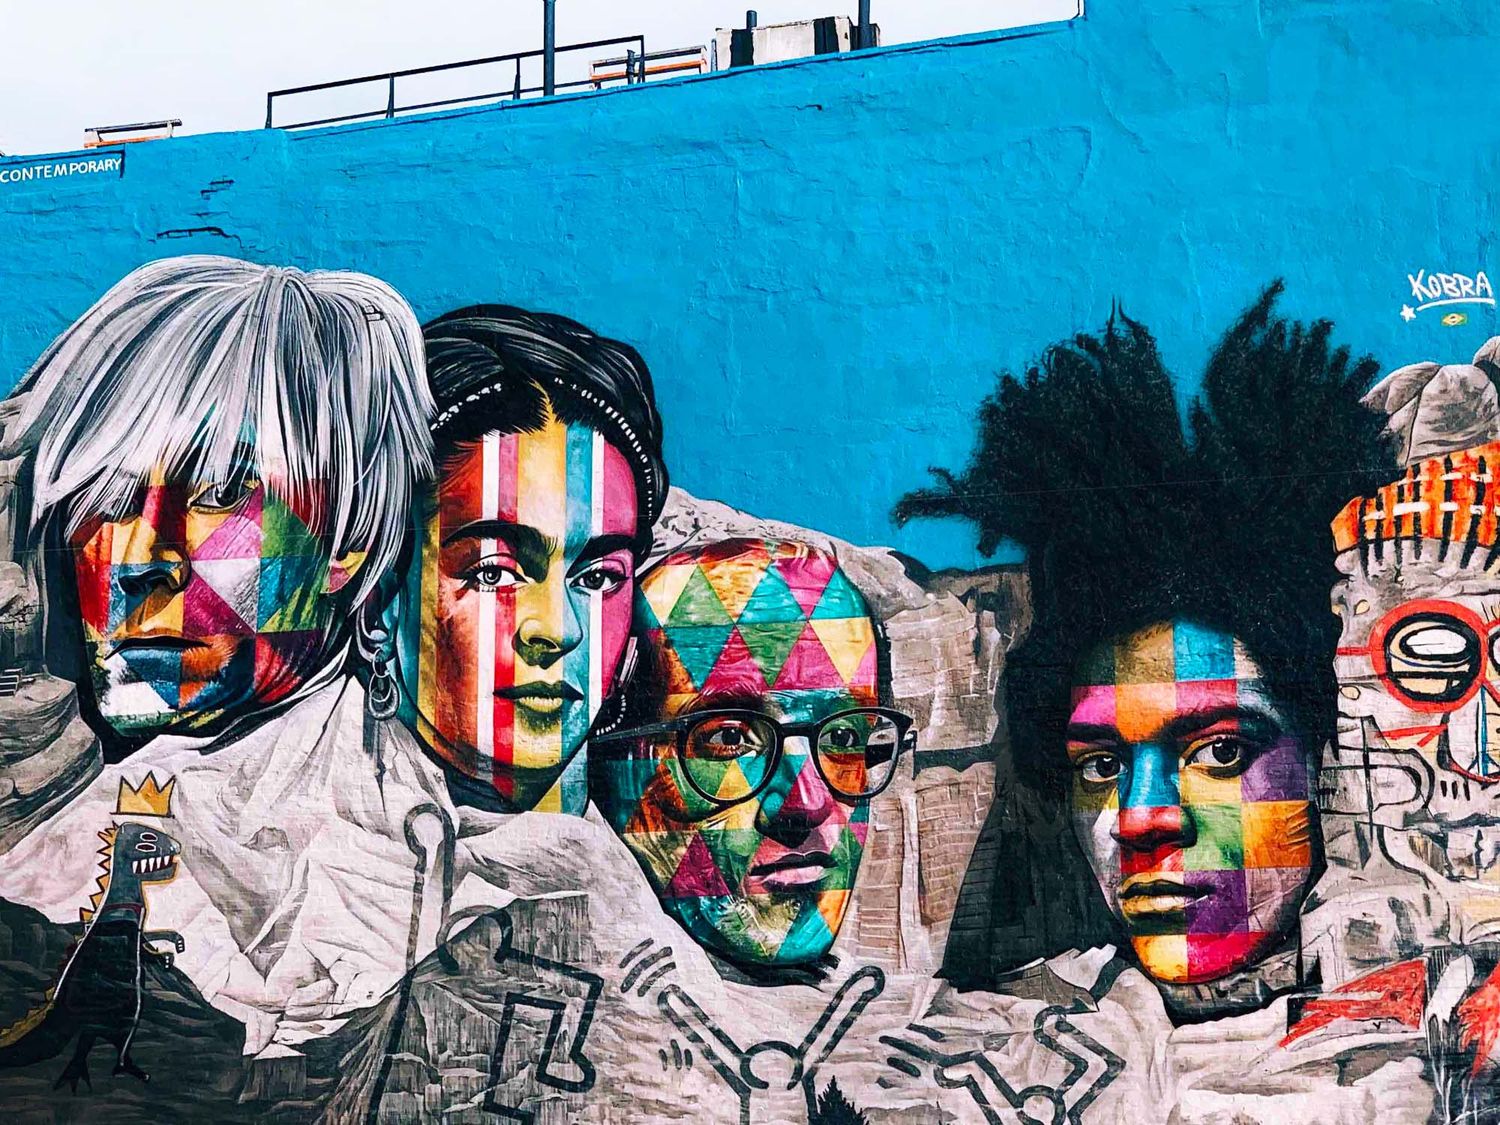 Brazilian artist with a huge talent and an inimitable style, Kobra created this mural in 2018 by reinterpreting  the Mount Rushmore with Andy Warhol, Frida Kahlo, Keith Haring and J-M Basquiat.